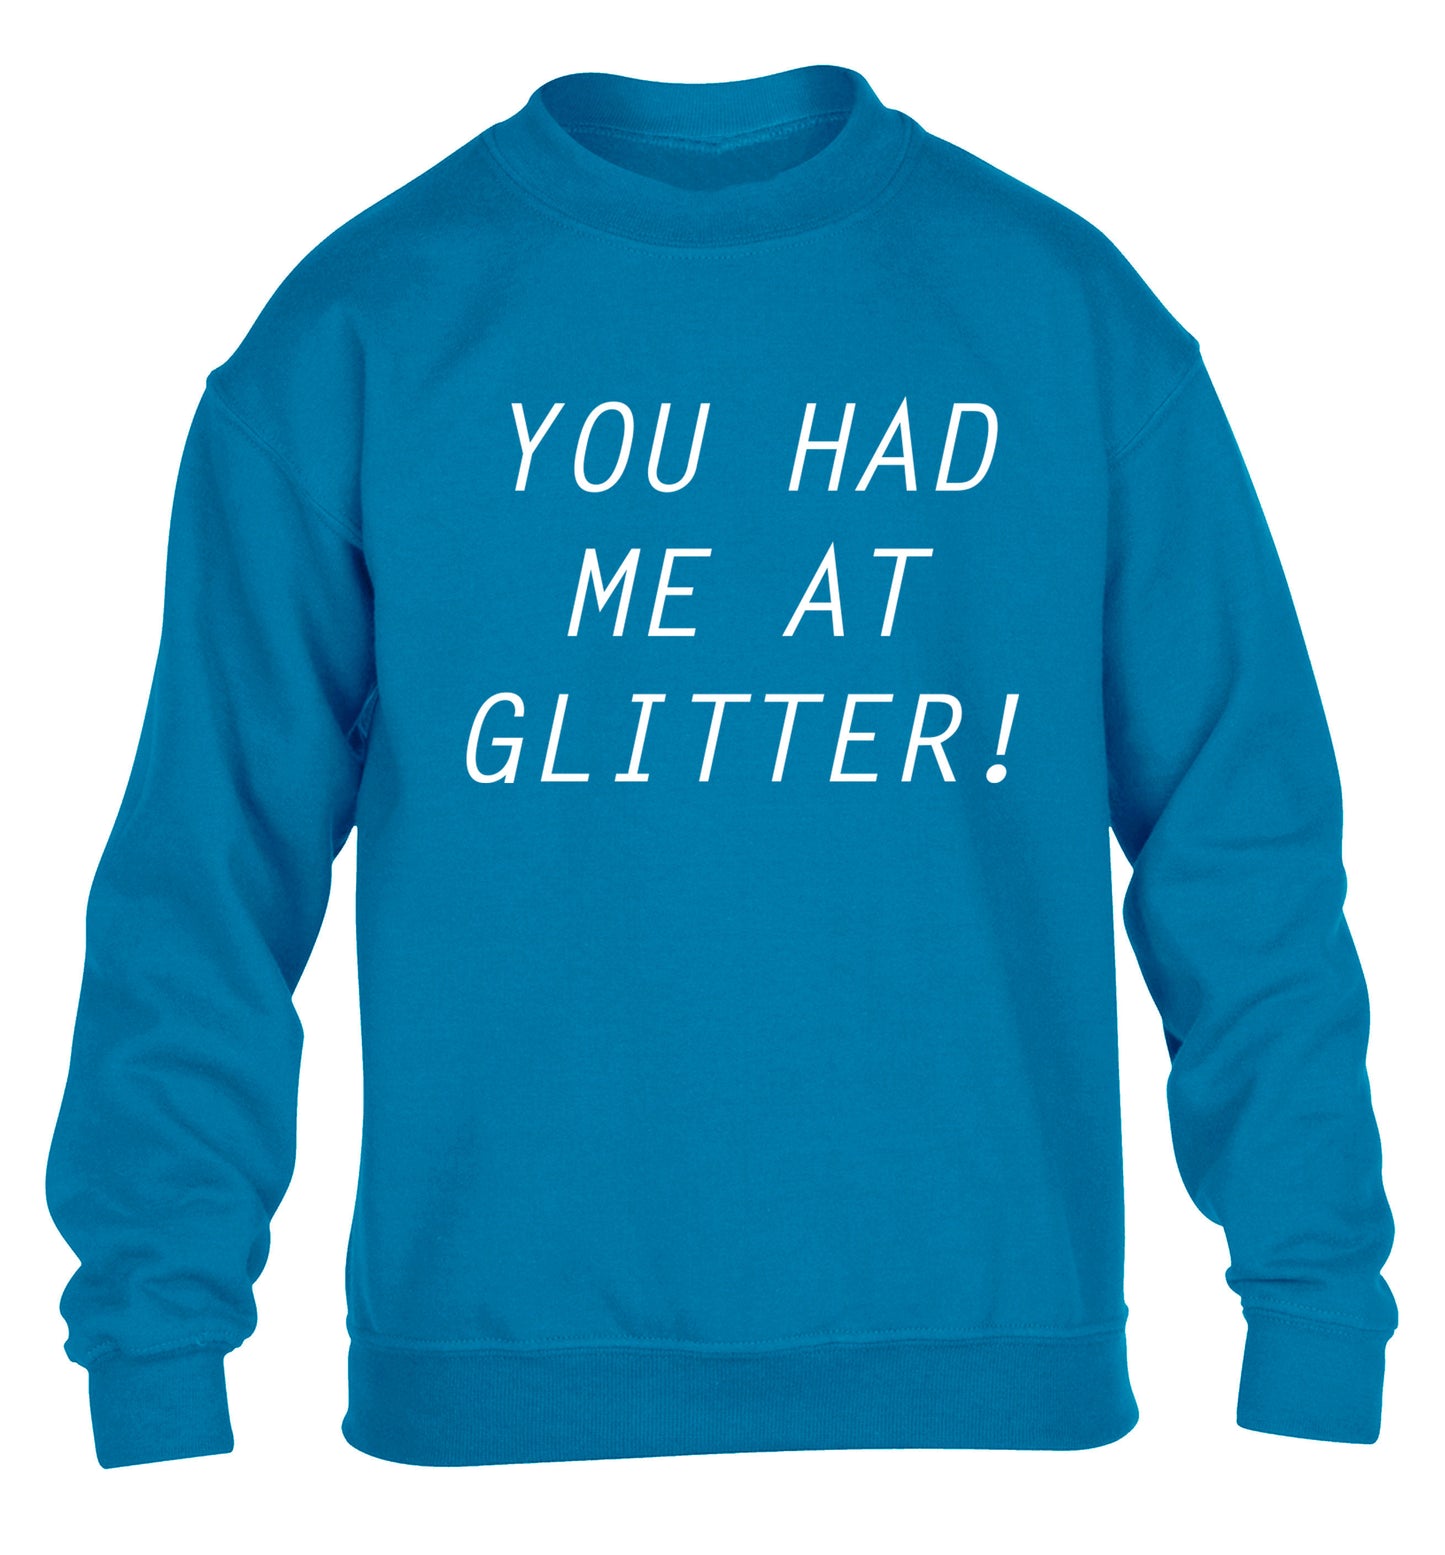 You had me at glitter children's blue sweater 12-14 Years